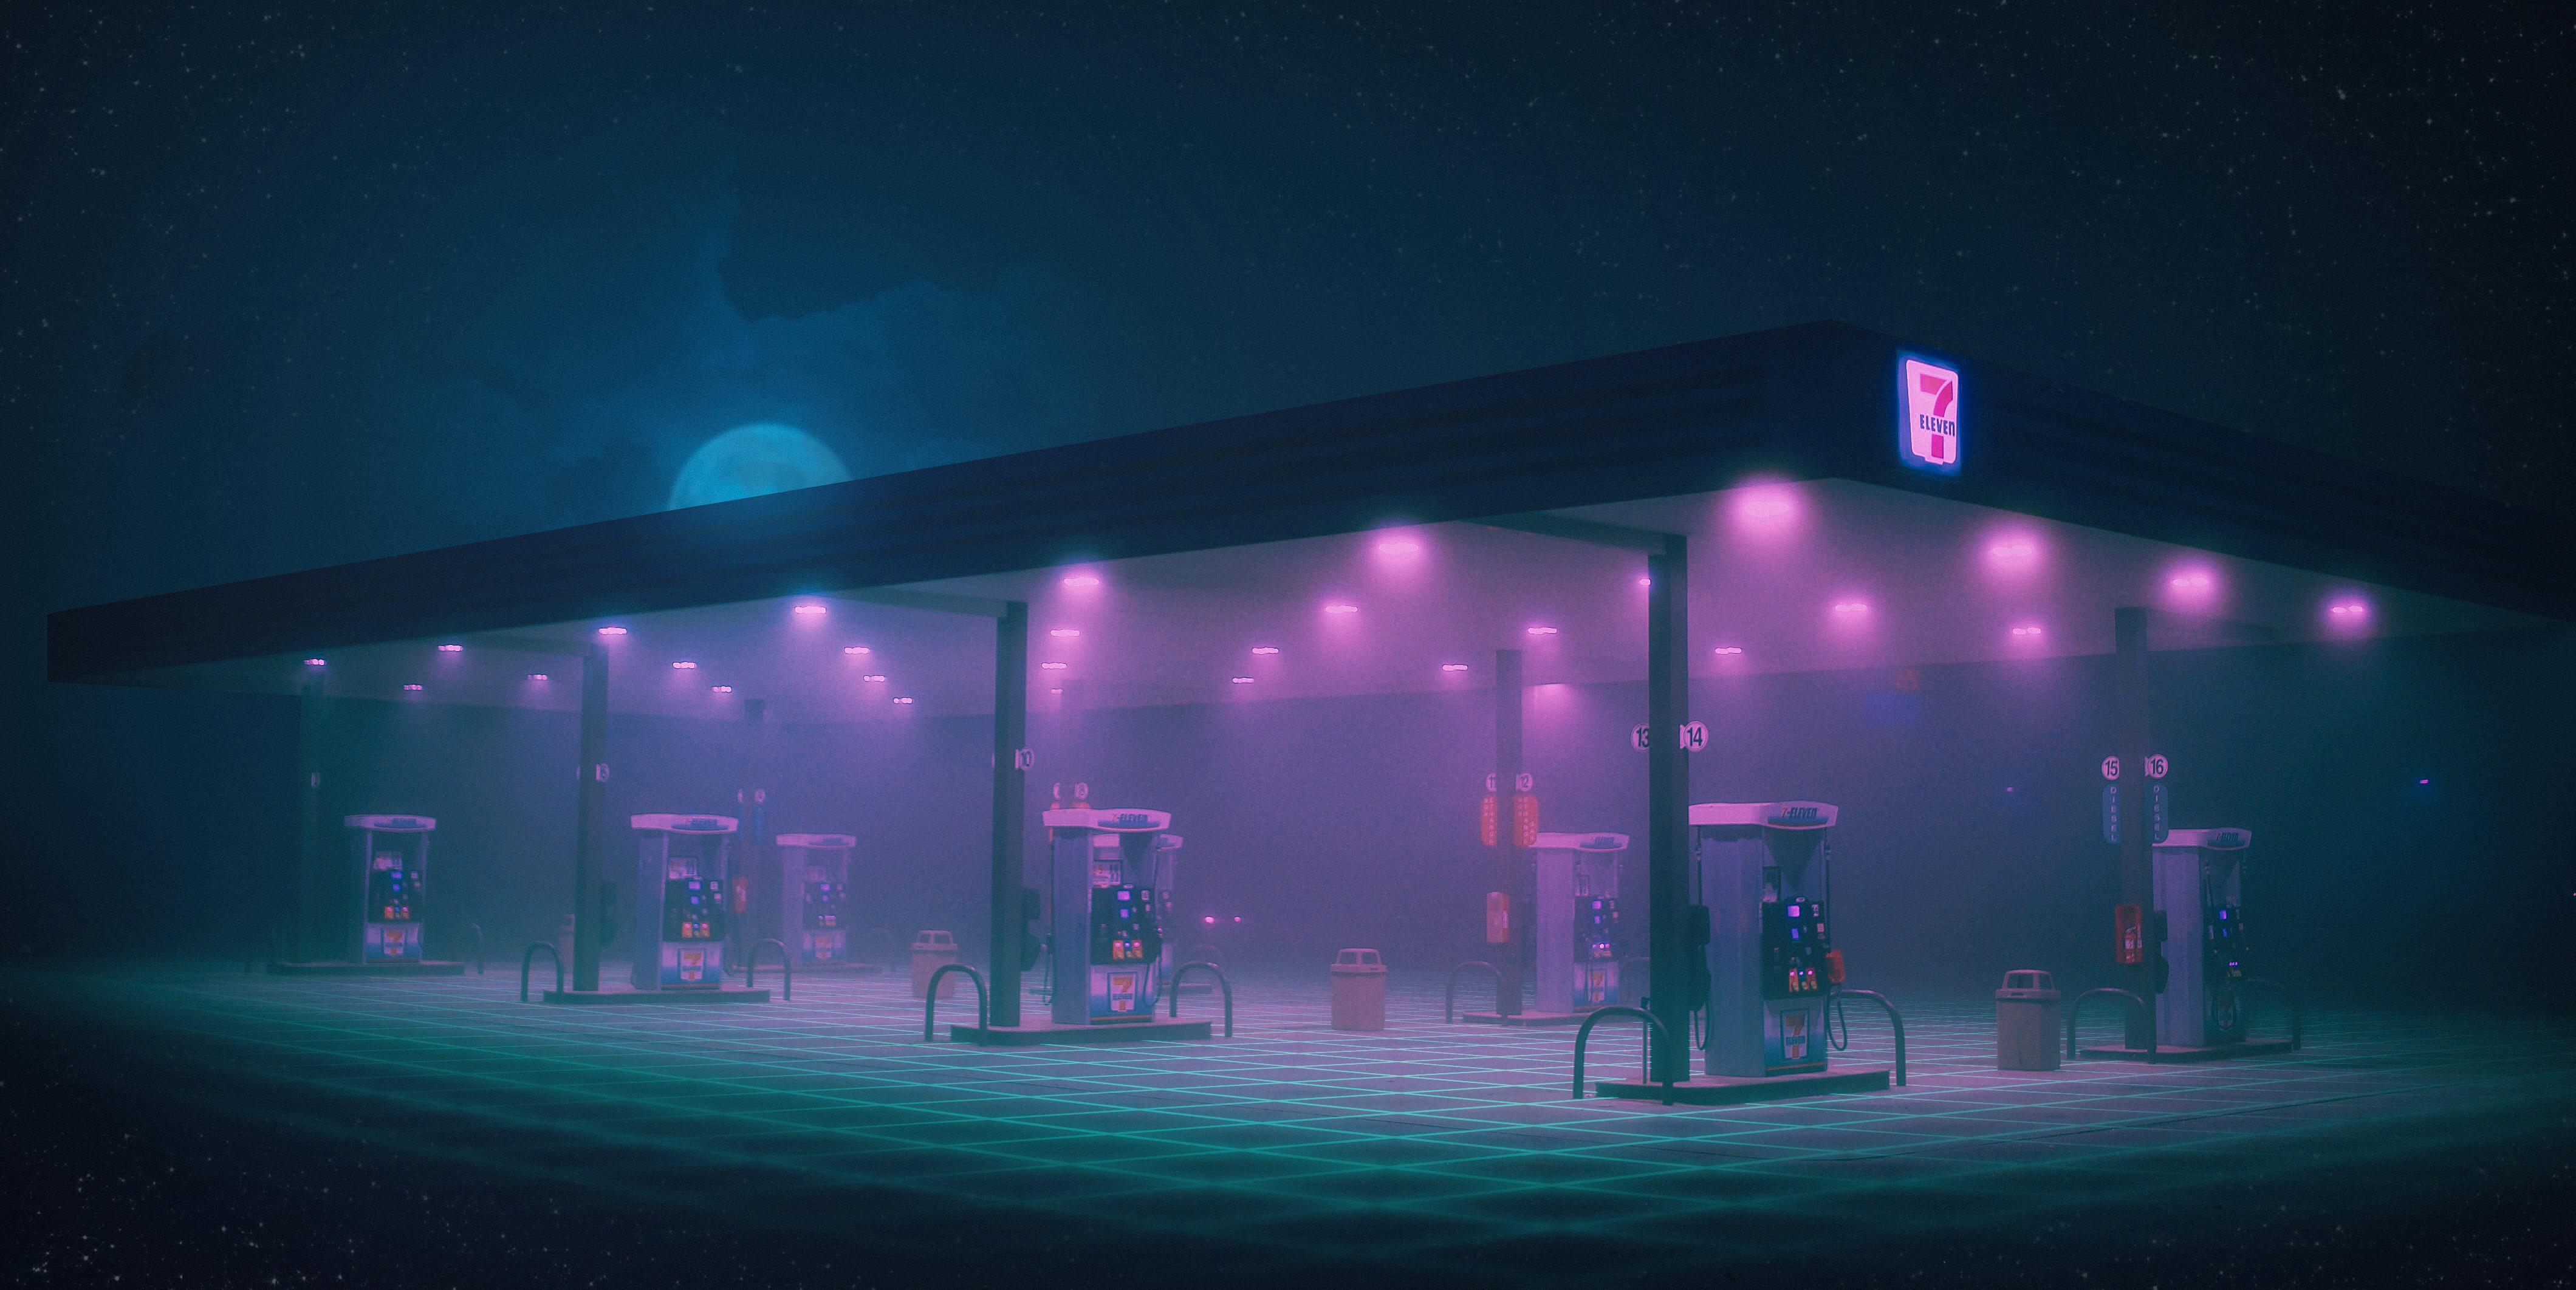 Someone asked for an Outrun version of the gas station, so here it